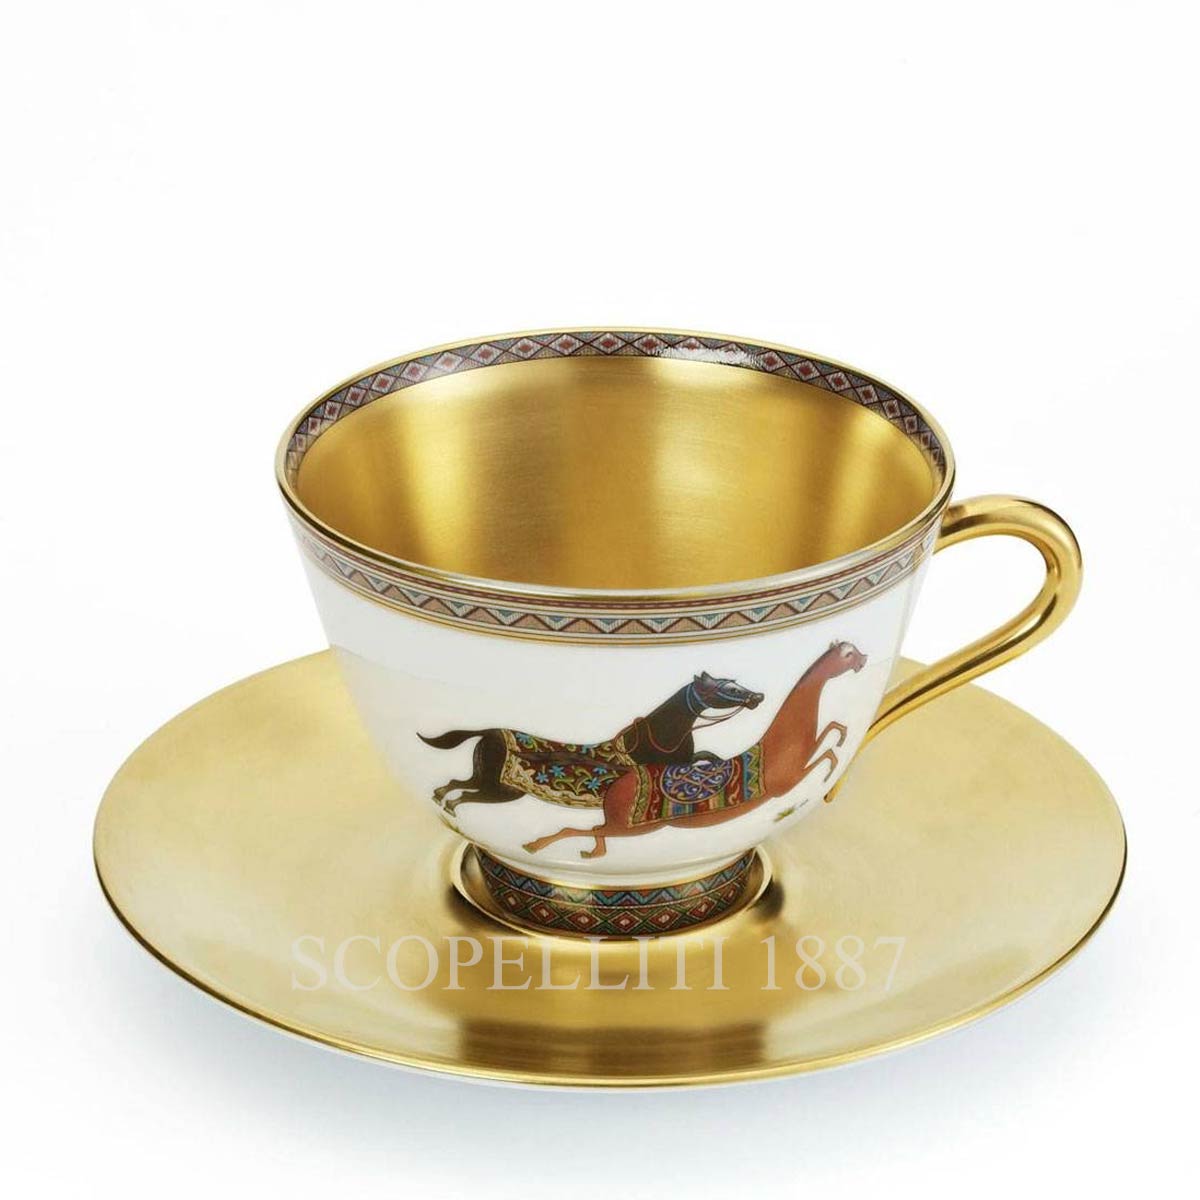 Hermes Gold Tea Cup and Saucer Cheval d'Orient - SCOPELLITI 1887